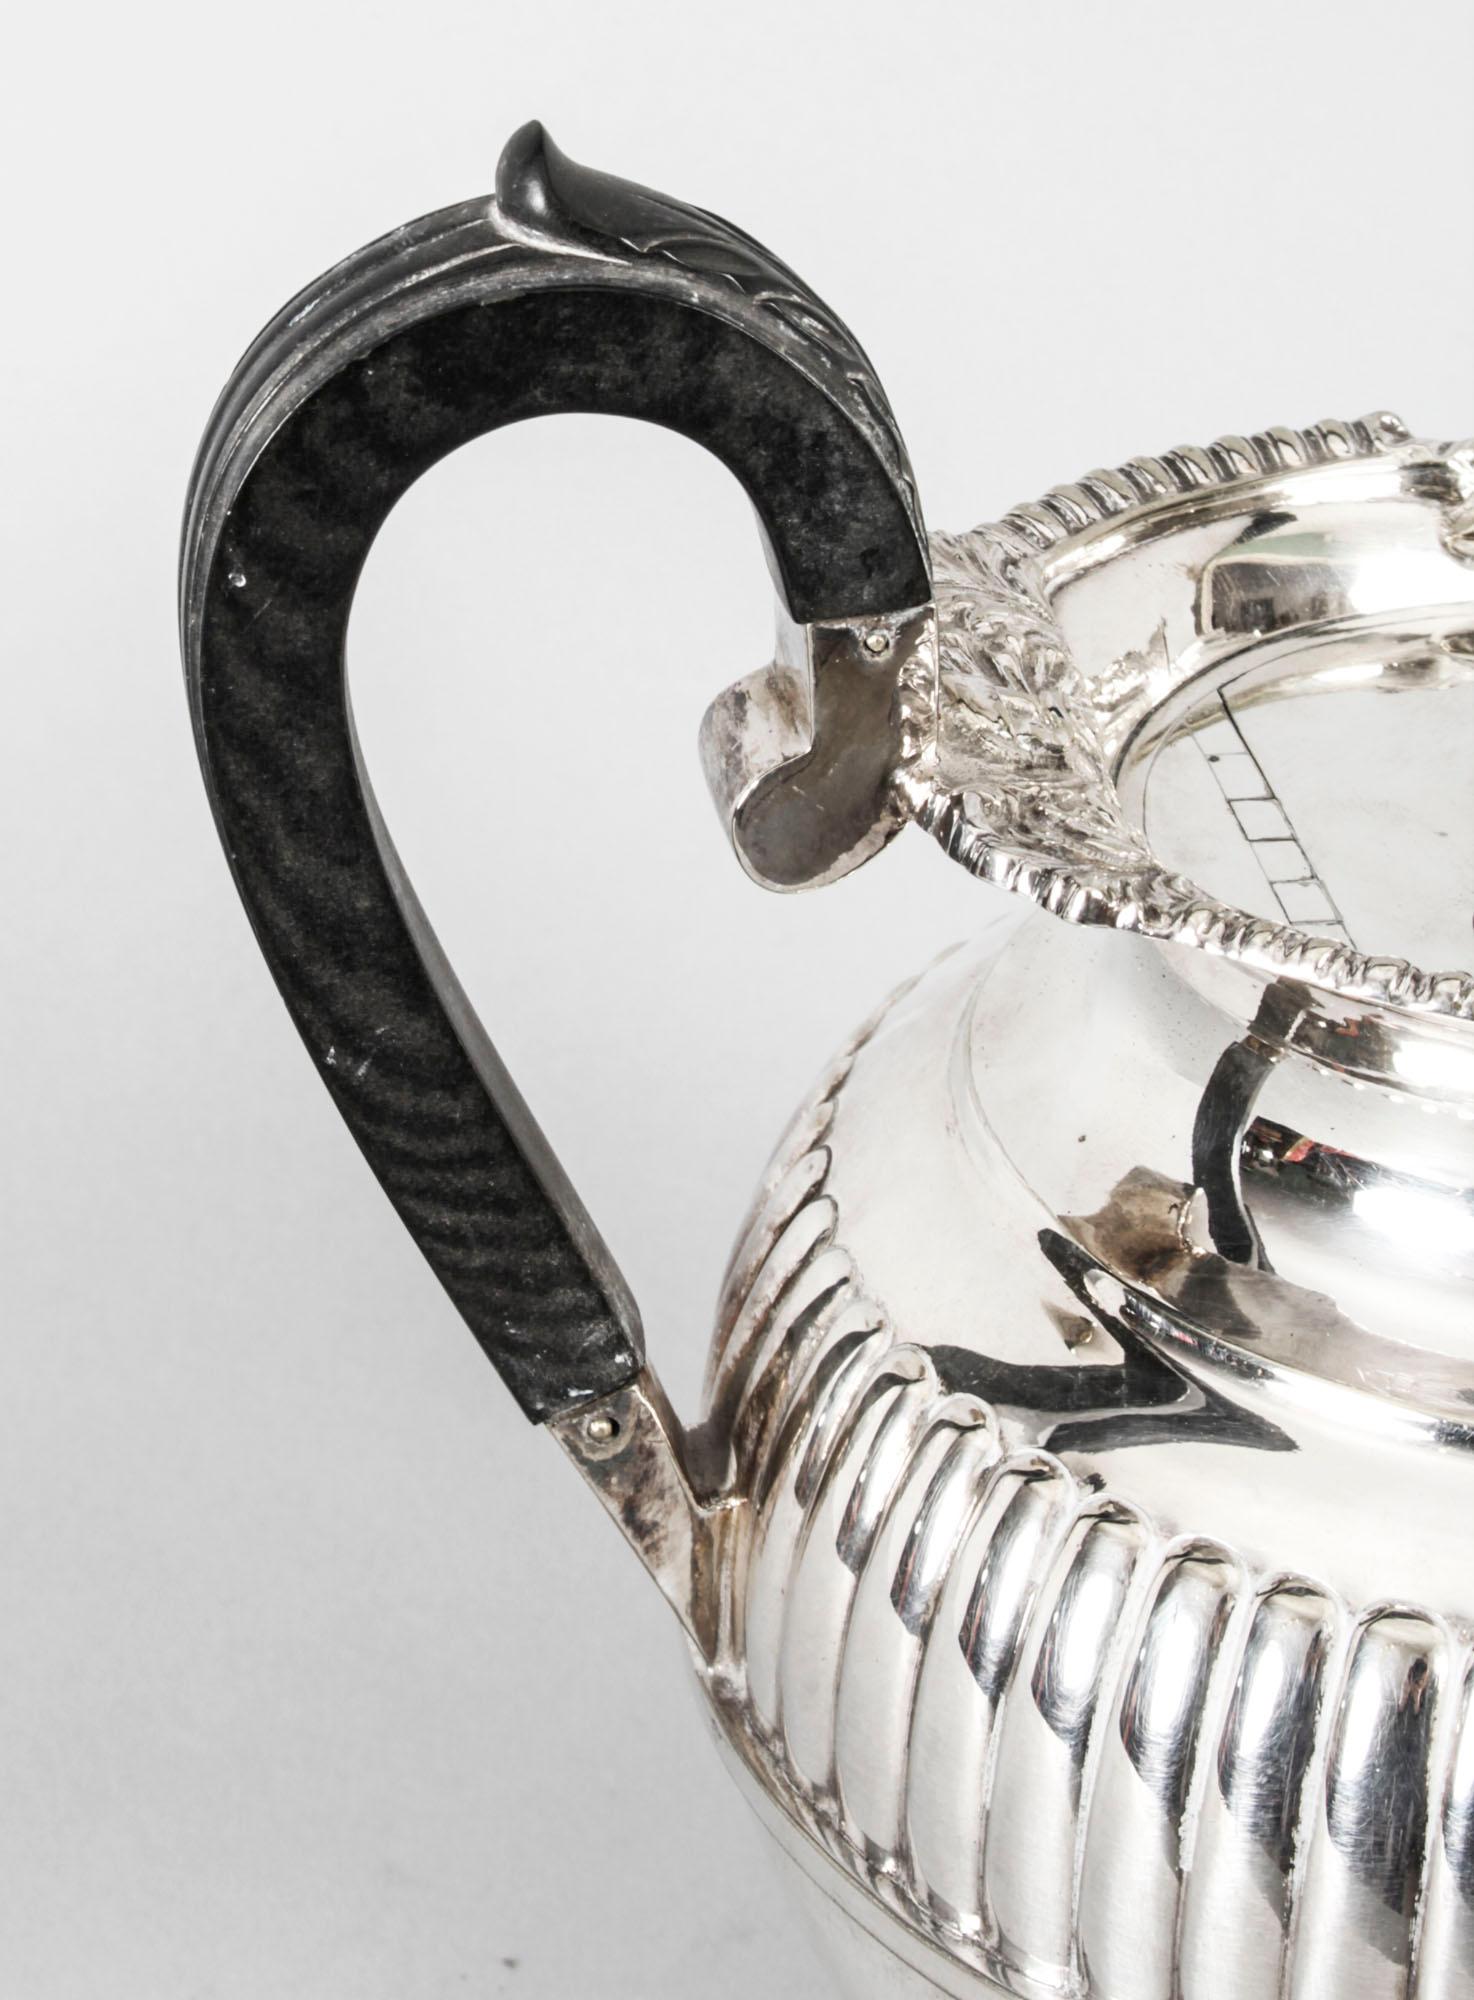 Mid-19th Century Antique Silver Plate Coffee Biggin on Stand by Elkington, 19th Century